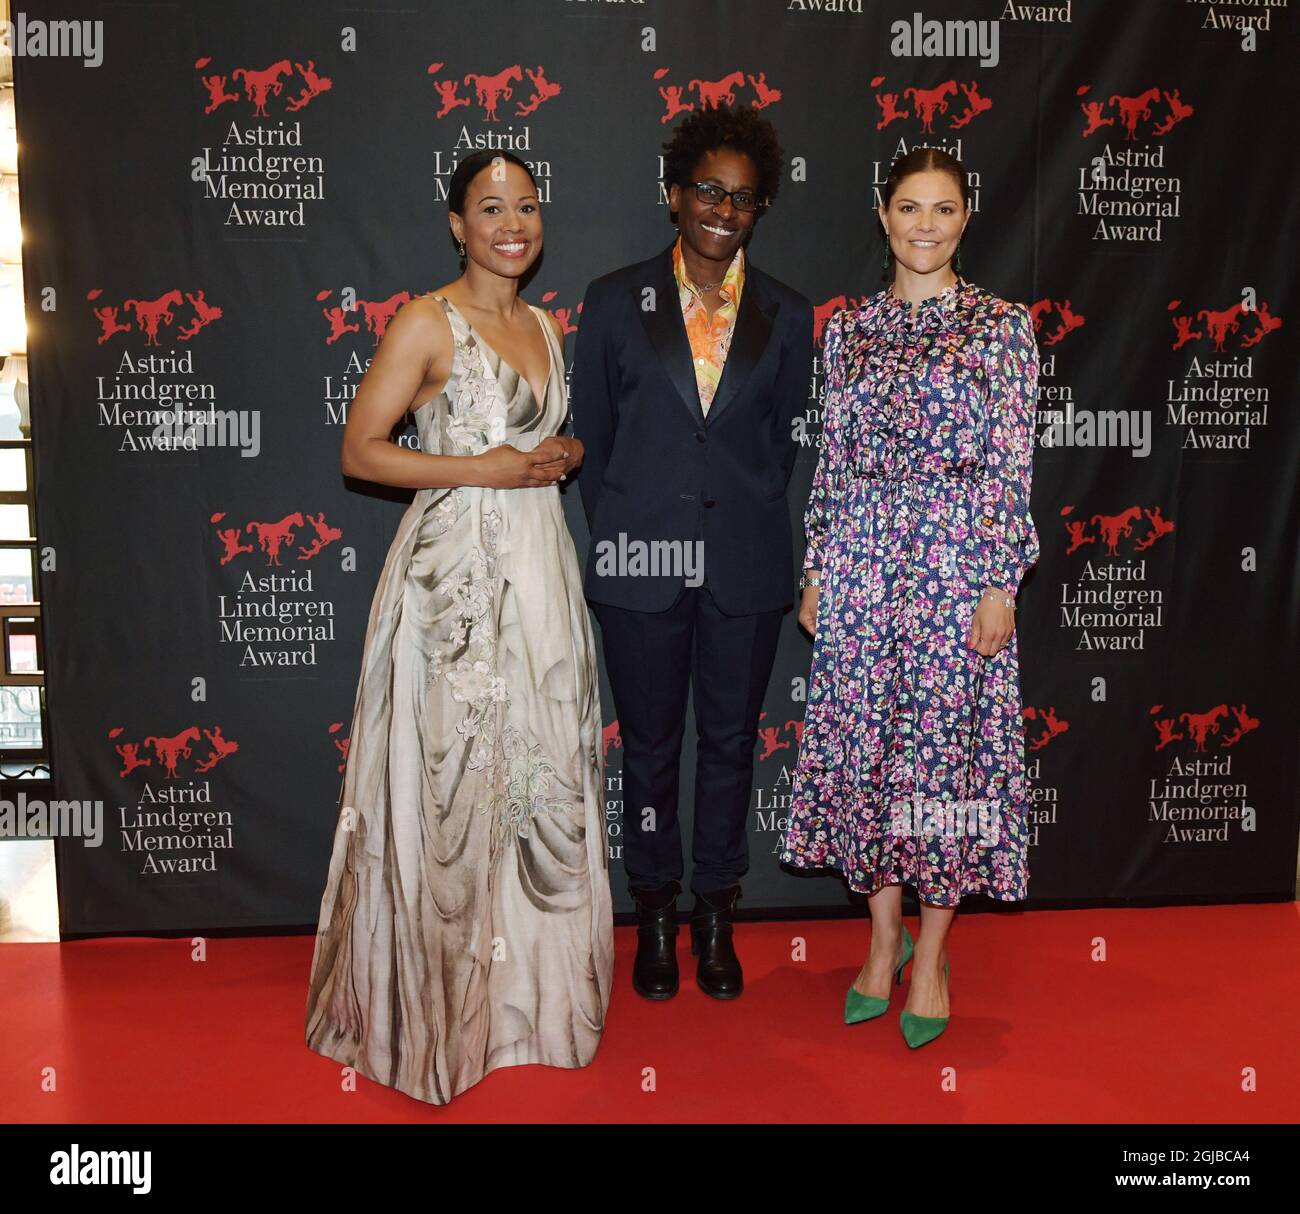 Jacqueline Woodson (C), laureate of the 2018 Astrid Lindgren Memorial Award (ALMA) poses for photographers with Swedish Culture and Democracy Minister Alice Bah Kuhnke (L) and Crown Princess Victoria (R) after the award ceremony at the Stockholm Concert Hall on May 28, 2018. Photo: Jessica Gow / TT / code 10070  Stock Photo